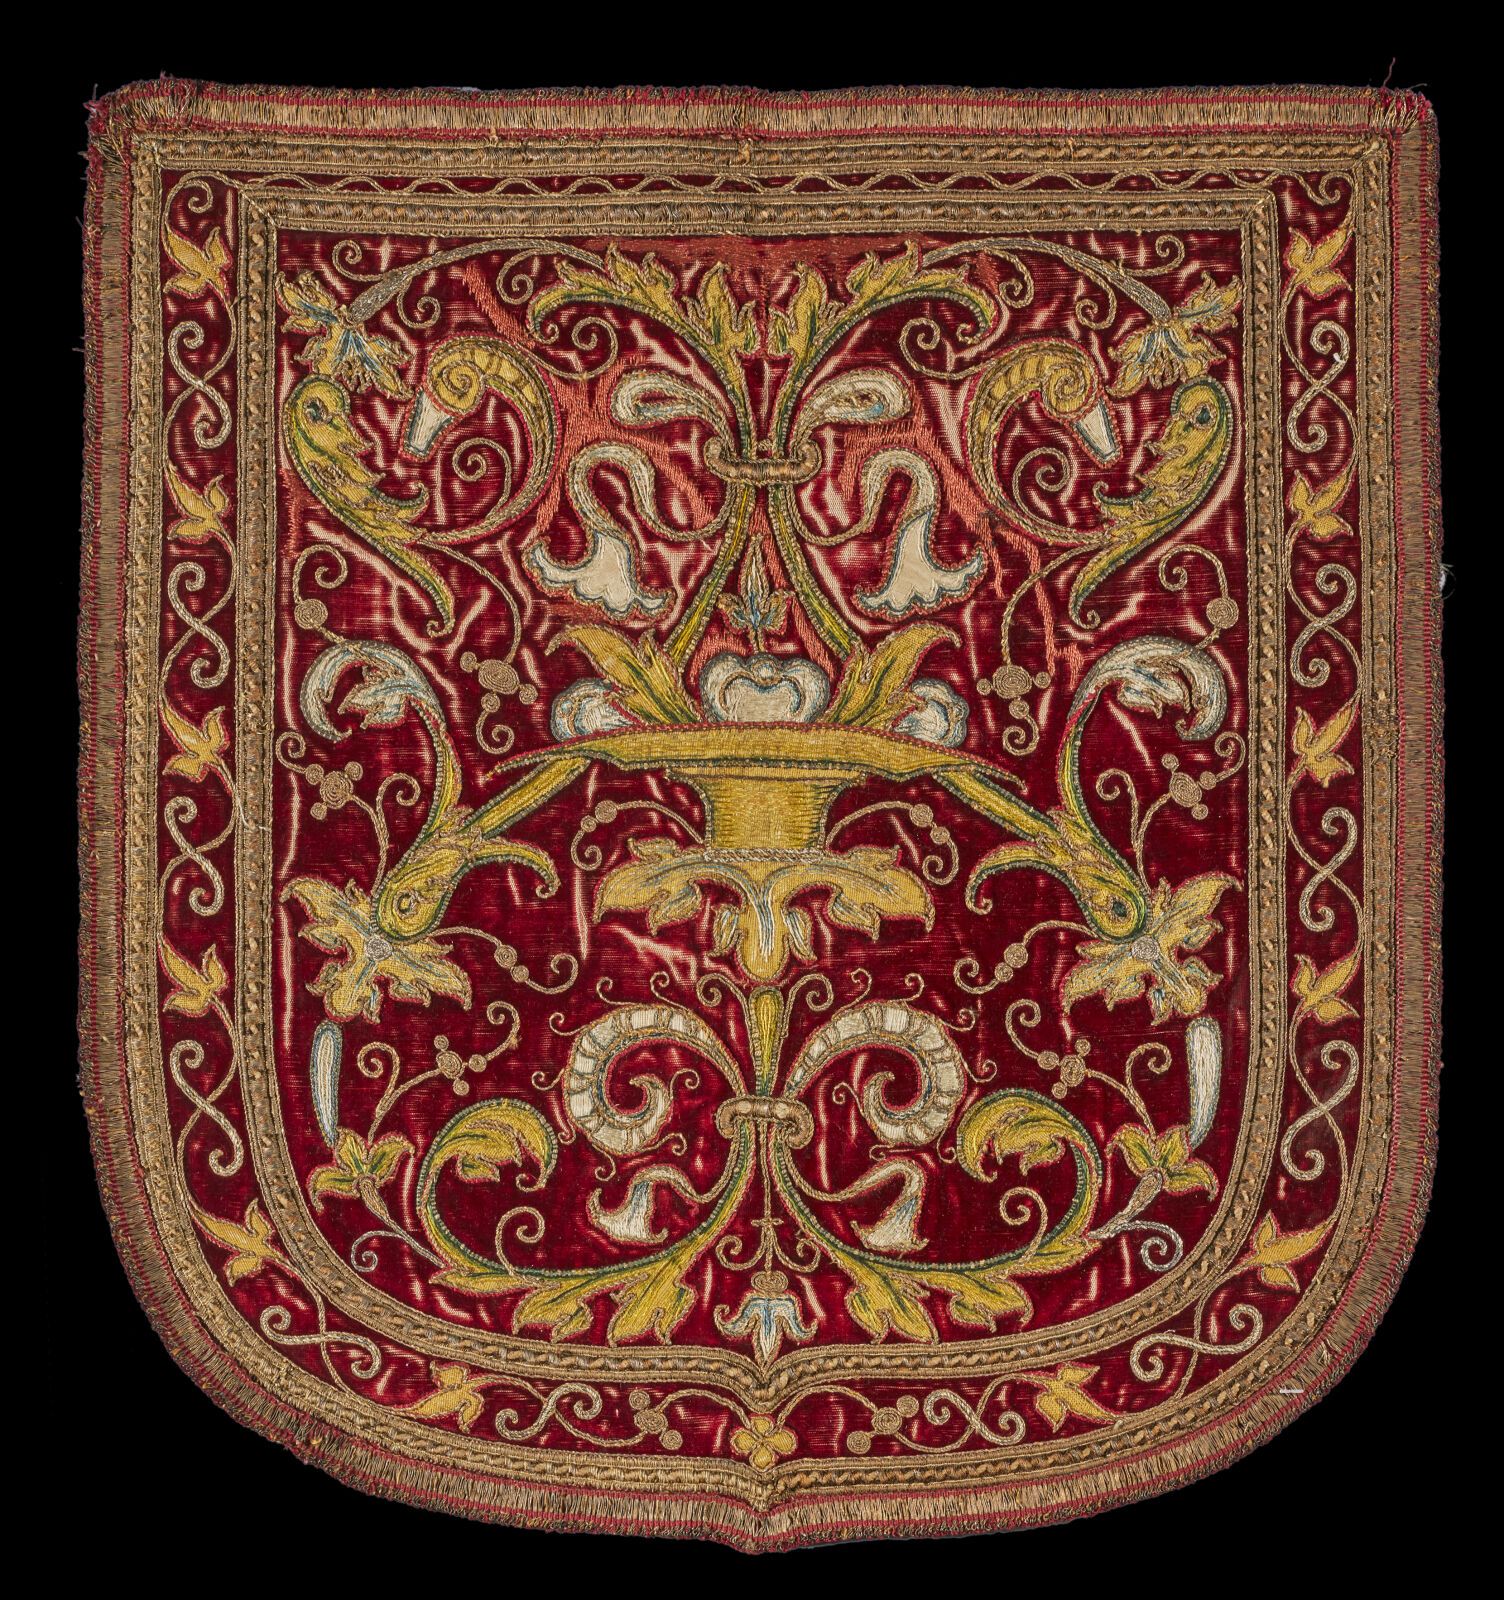 Null Chaperon, Italy, 16th century
Velvet embroidered in polychrome silk and gol&hellip;